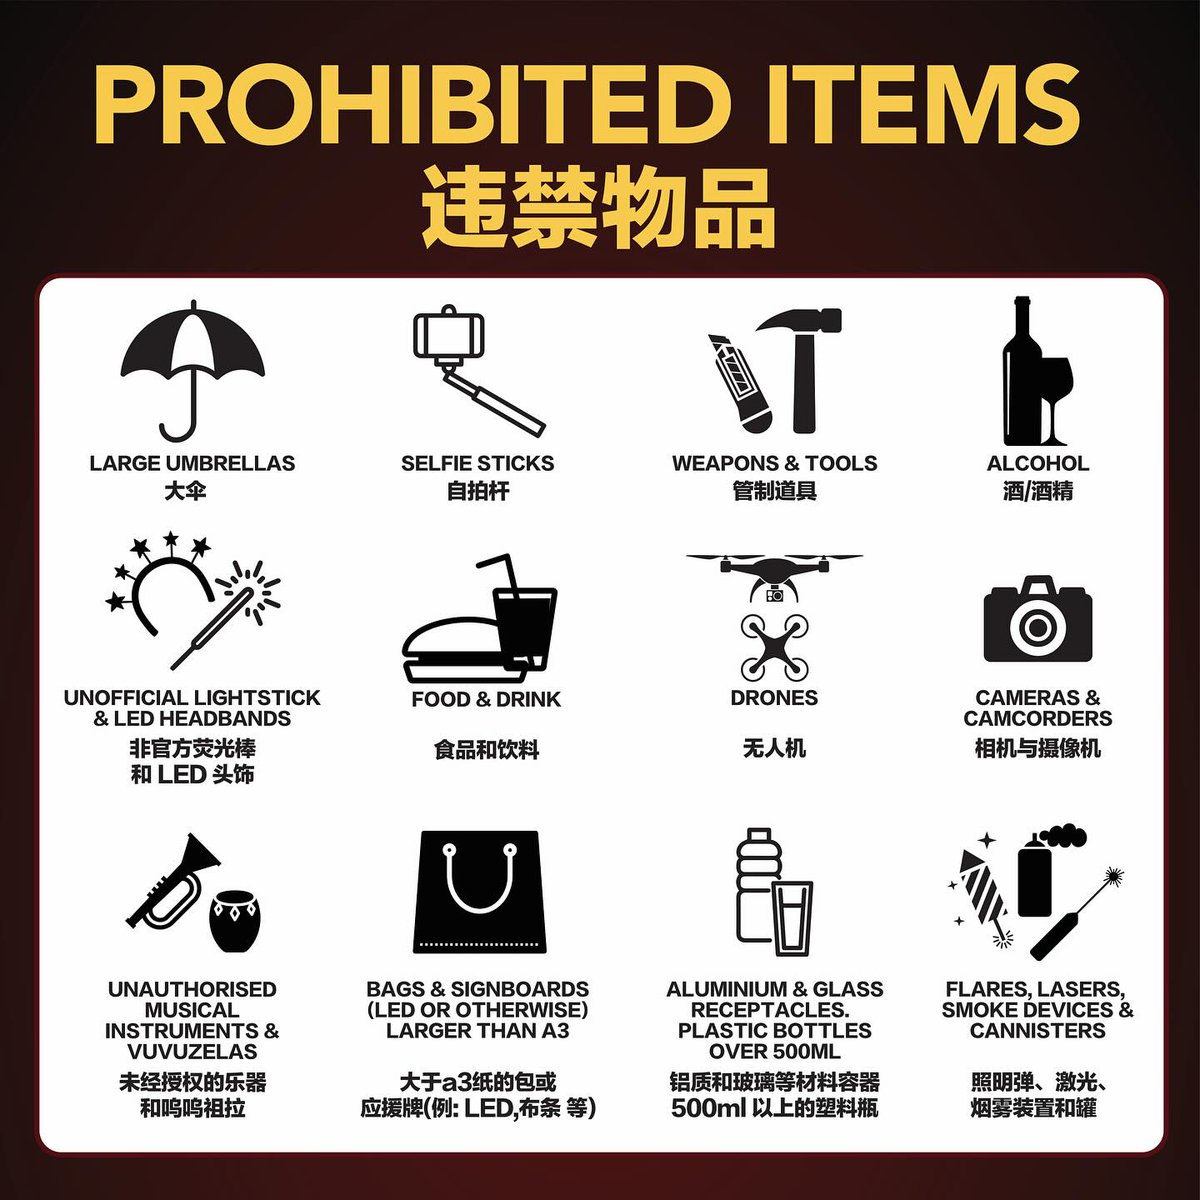 Ahead of the Jay Chou Carnival World Tour at GIANTS Stadium tomorrow night, please familiarise yourself with the site map and prohibited items. Gates open at 4:30pm & show begins at 7:30pm. For more information and important things to note, please visit: tinyurl.com/SYAdvisory2024